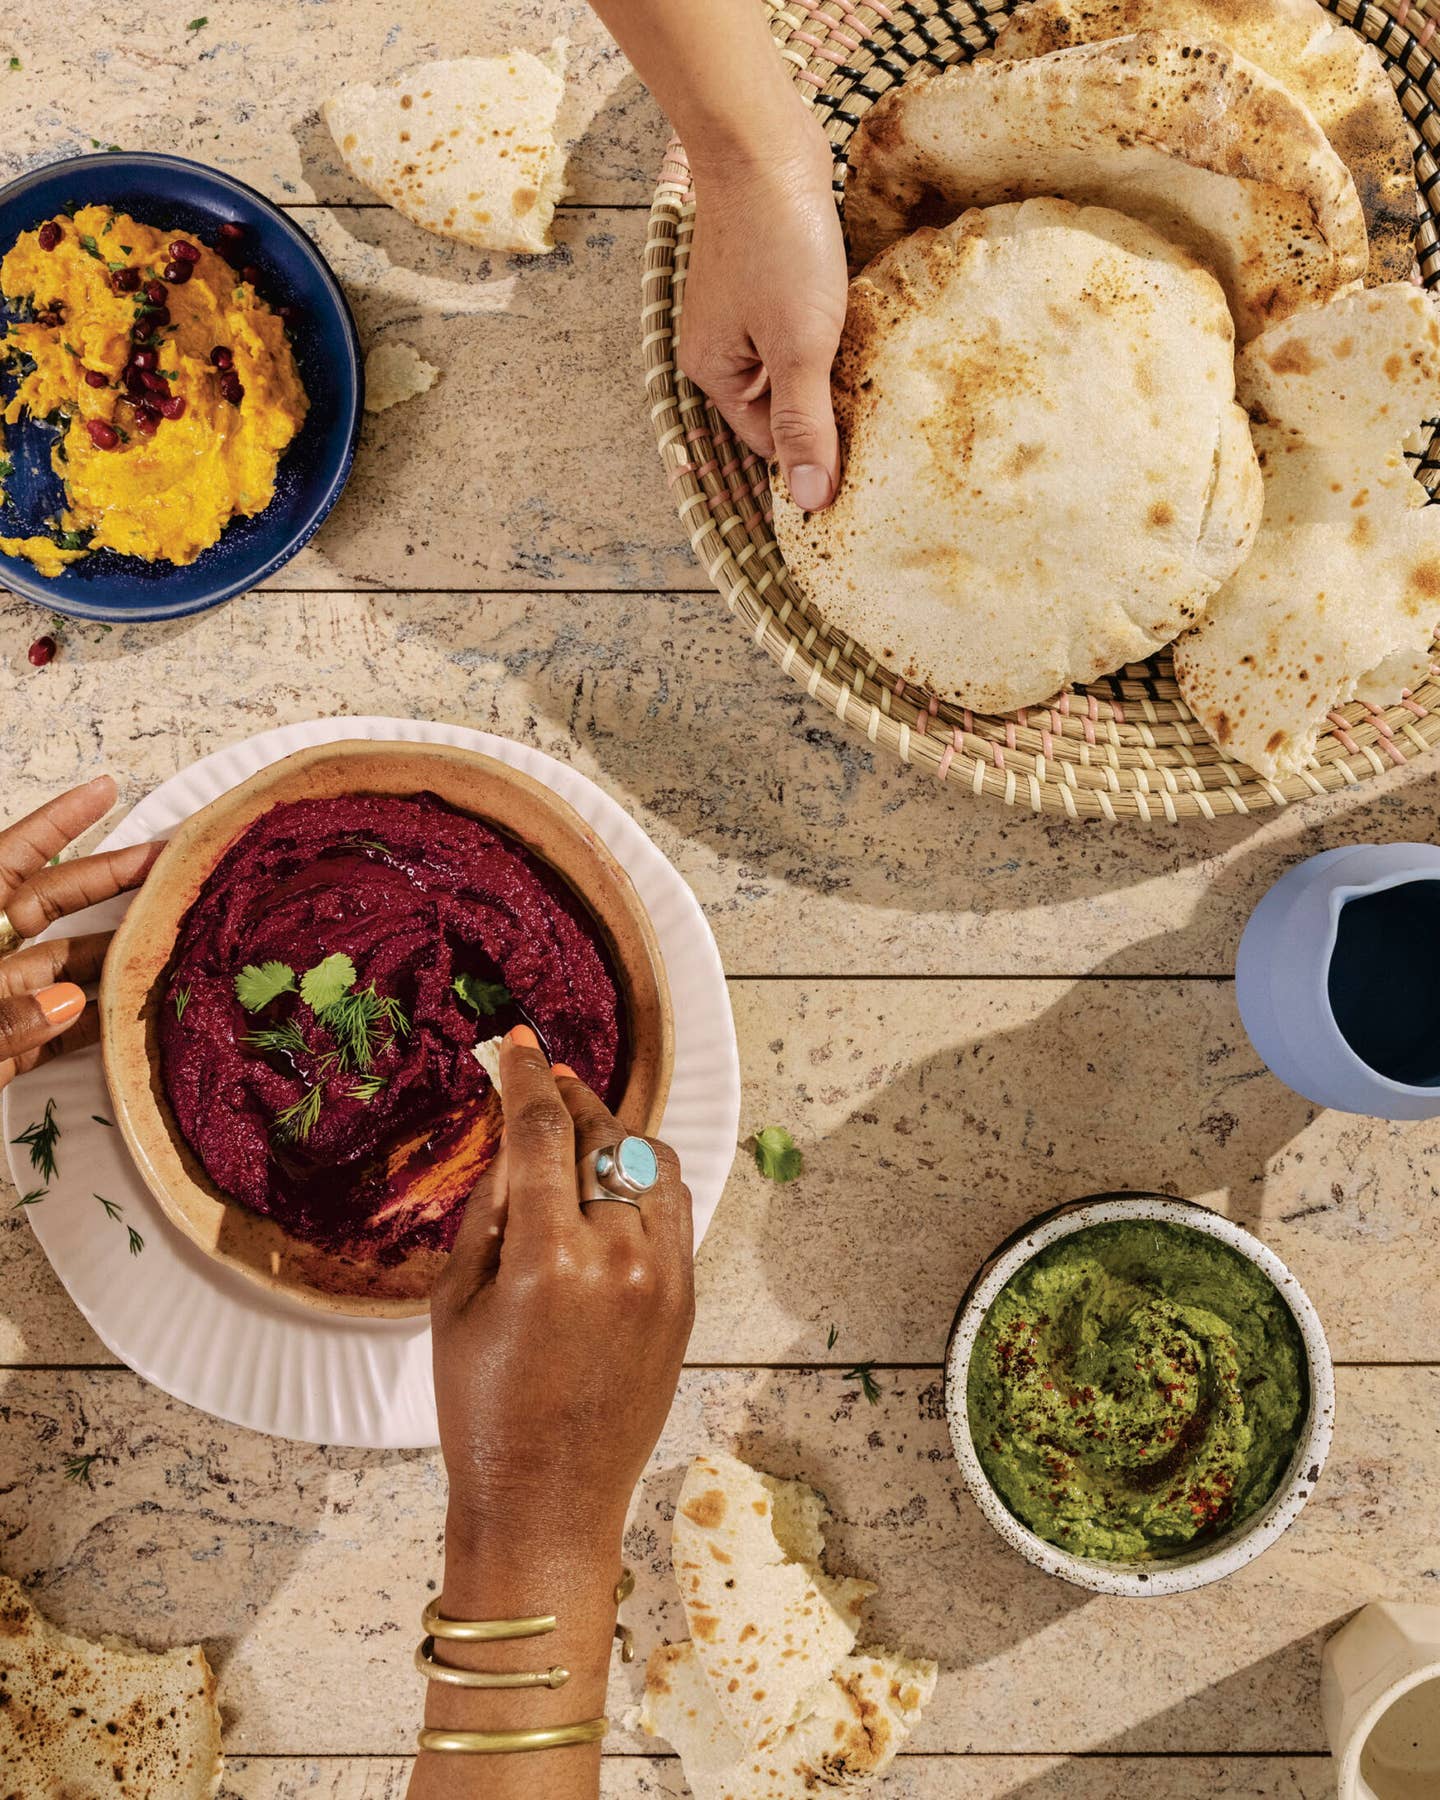 Rediscovering Communal Ramadan Meals Brought Me Back To My Purpose As a Chef